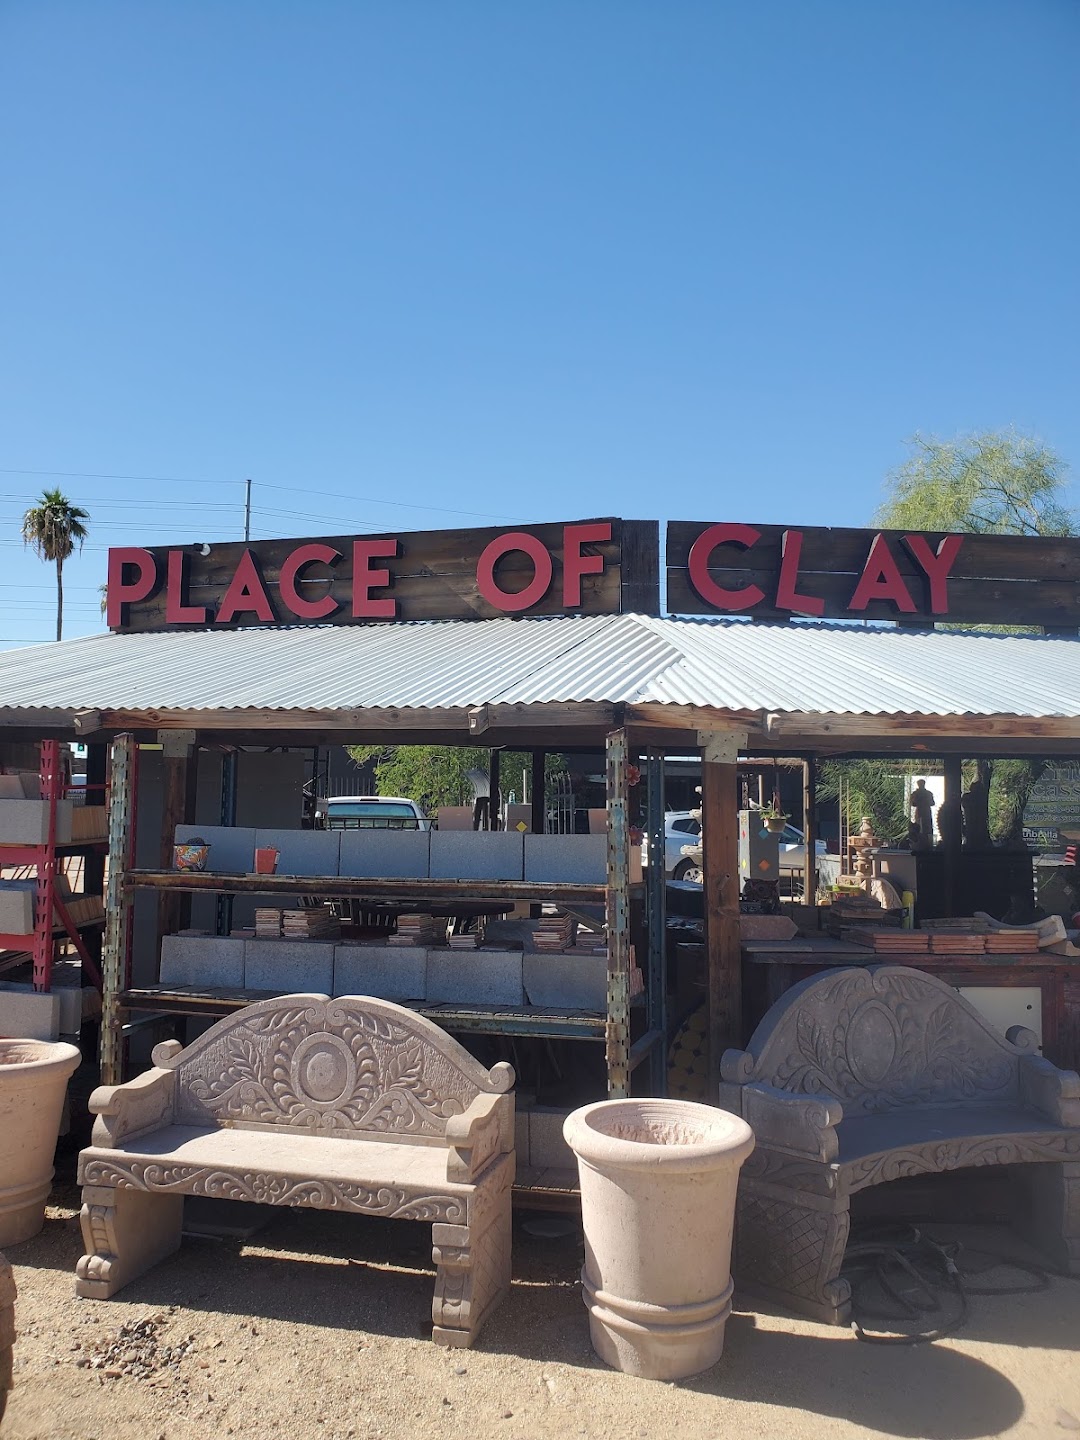 Place of Clay